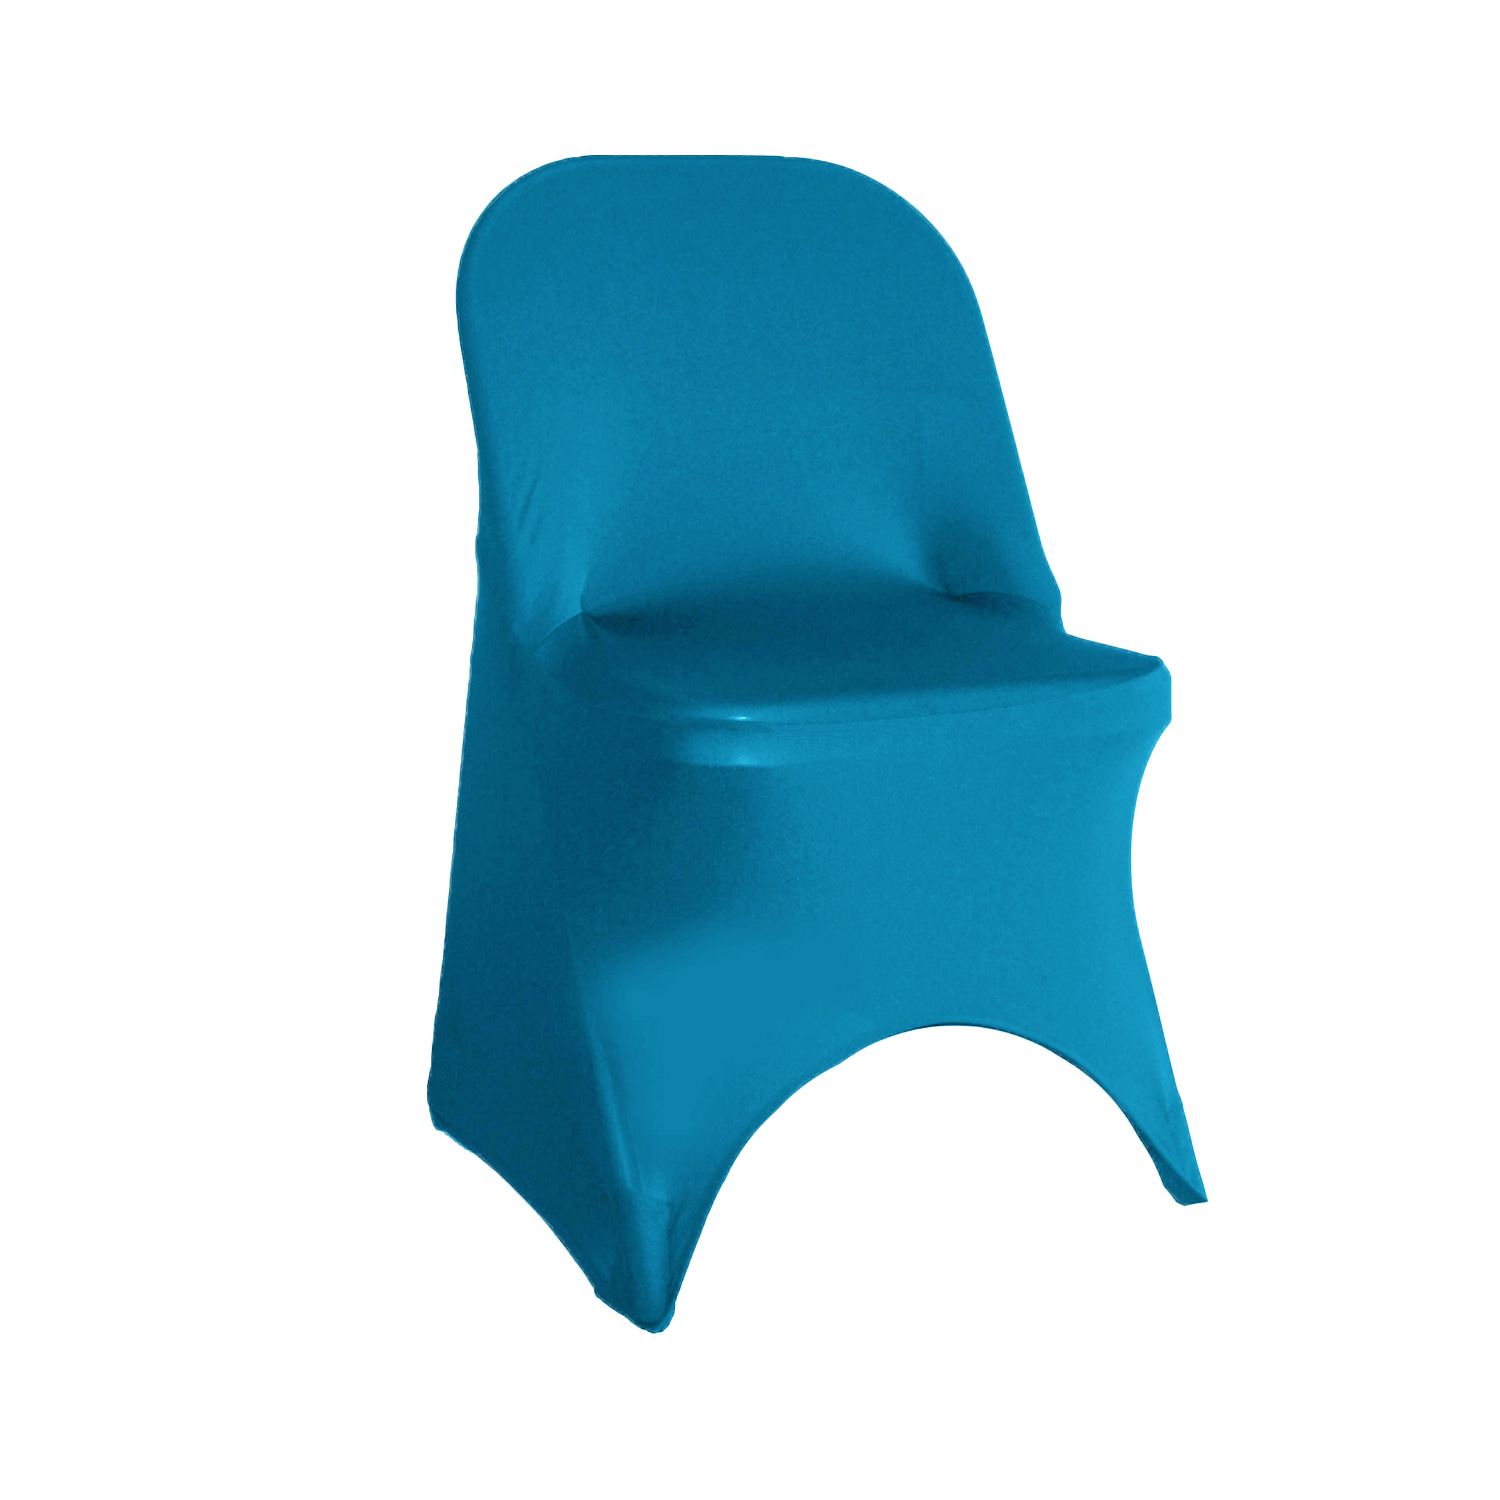 Your Chair Covers - Stretch Spandex Folding Chair Cover Malibu Blue for Wedding, Party, Birthday, Patio, etc. - image 1 of 3